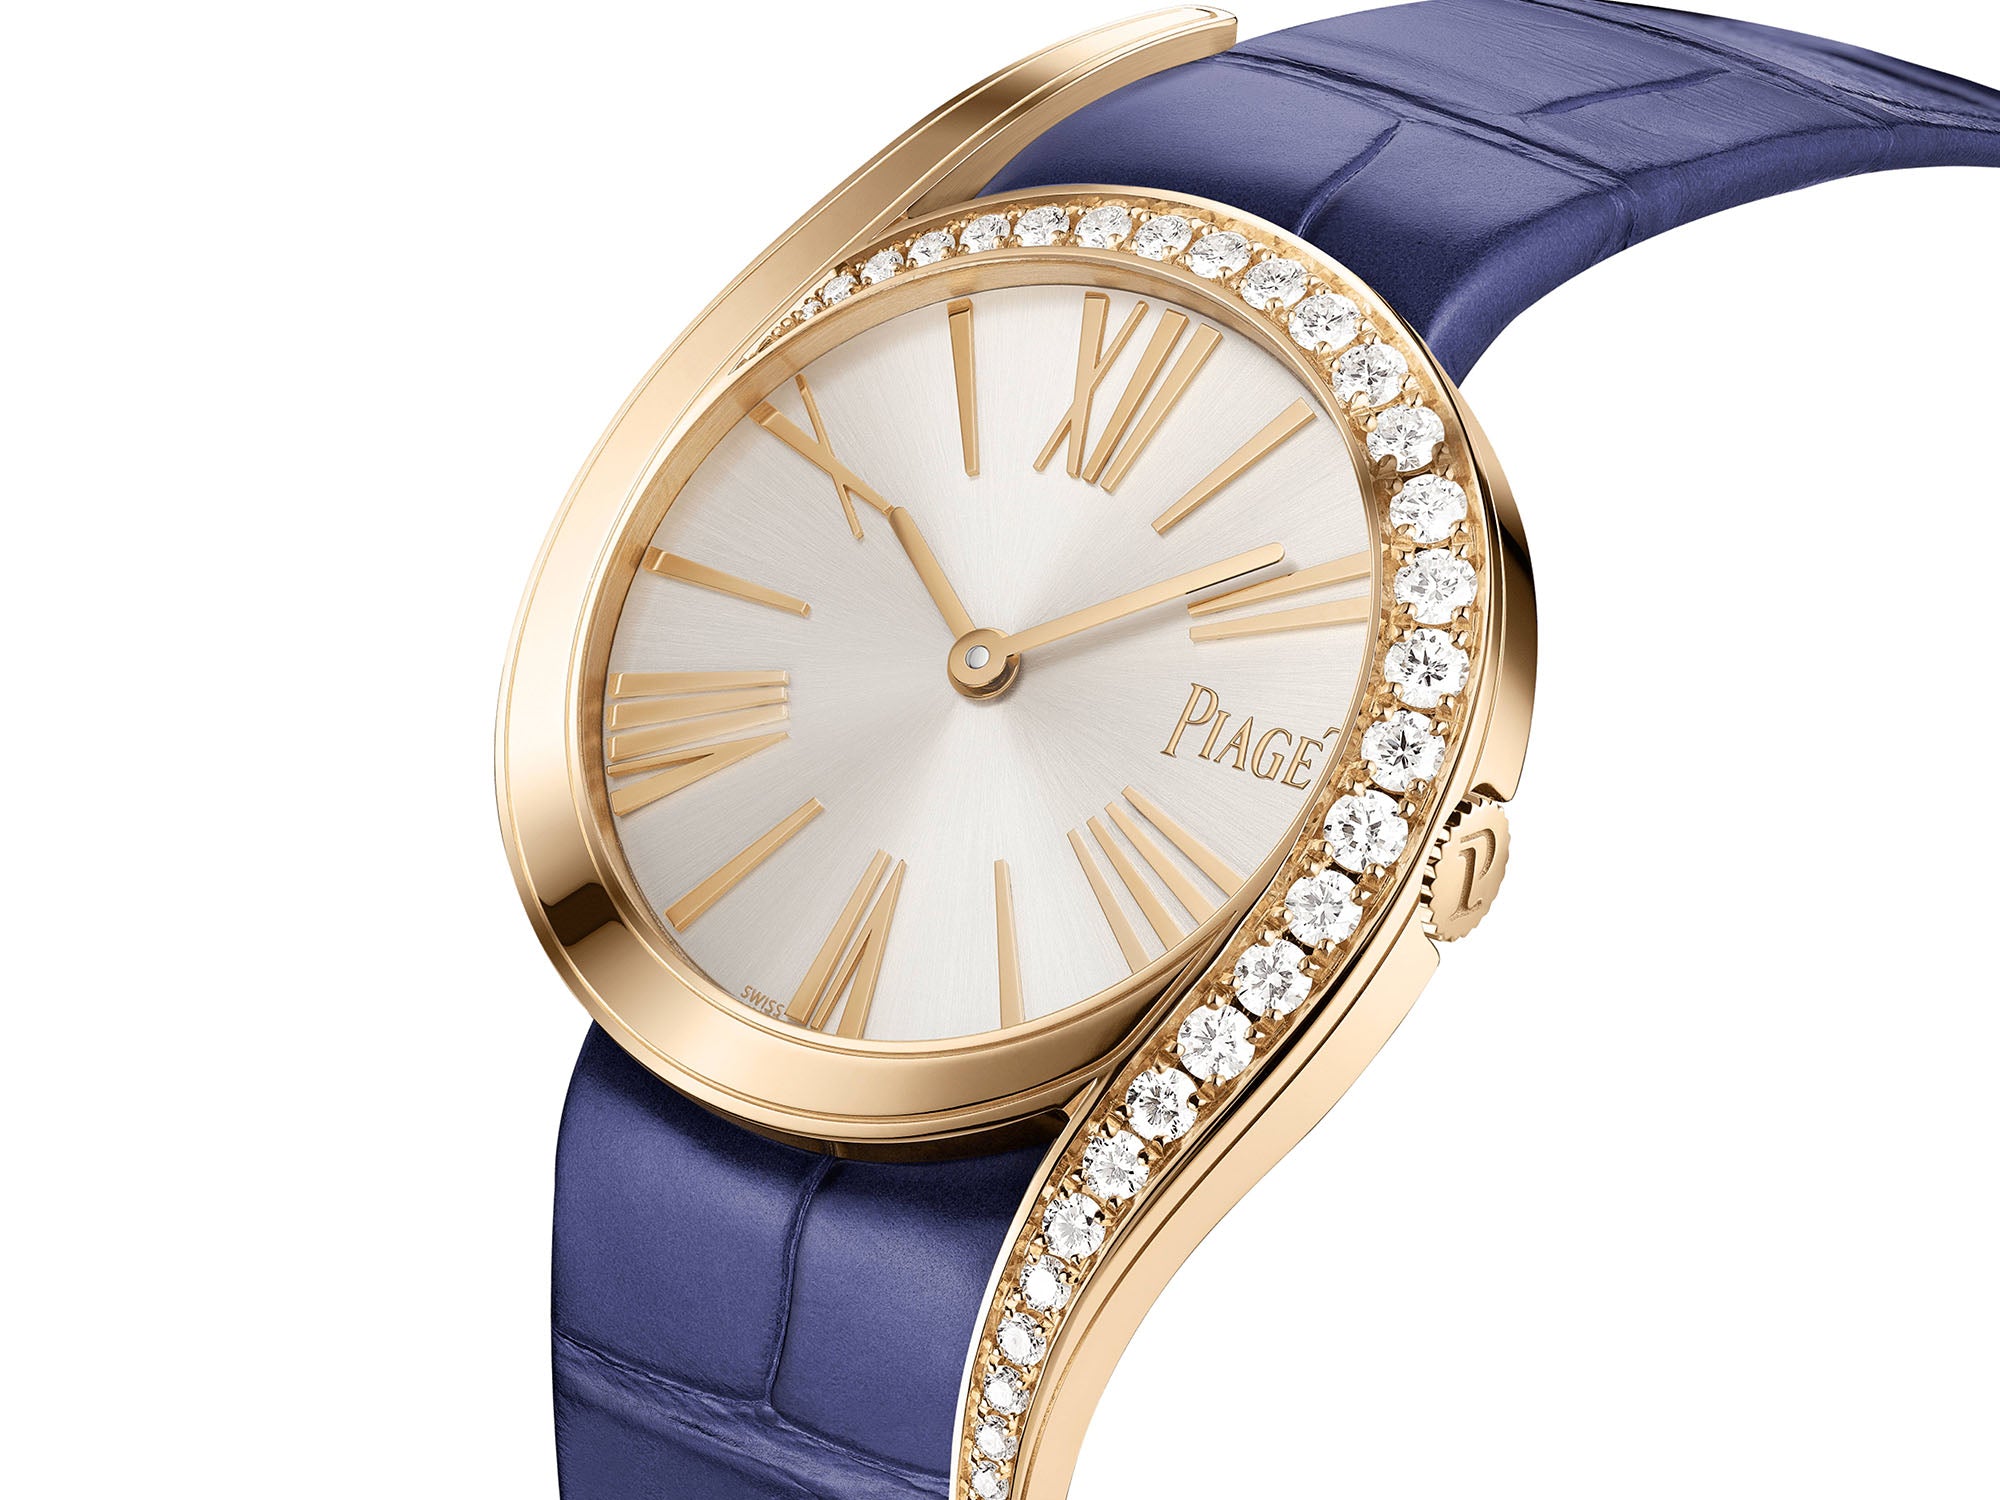 30 Best Women's Watches from Under $500 to Over $150K